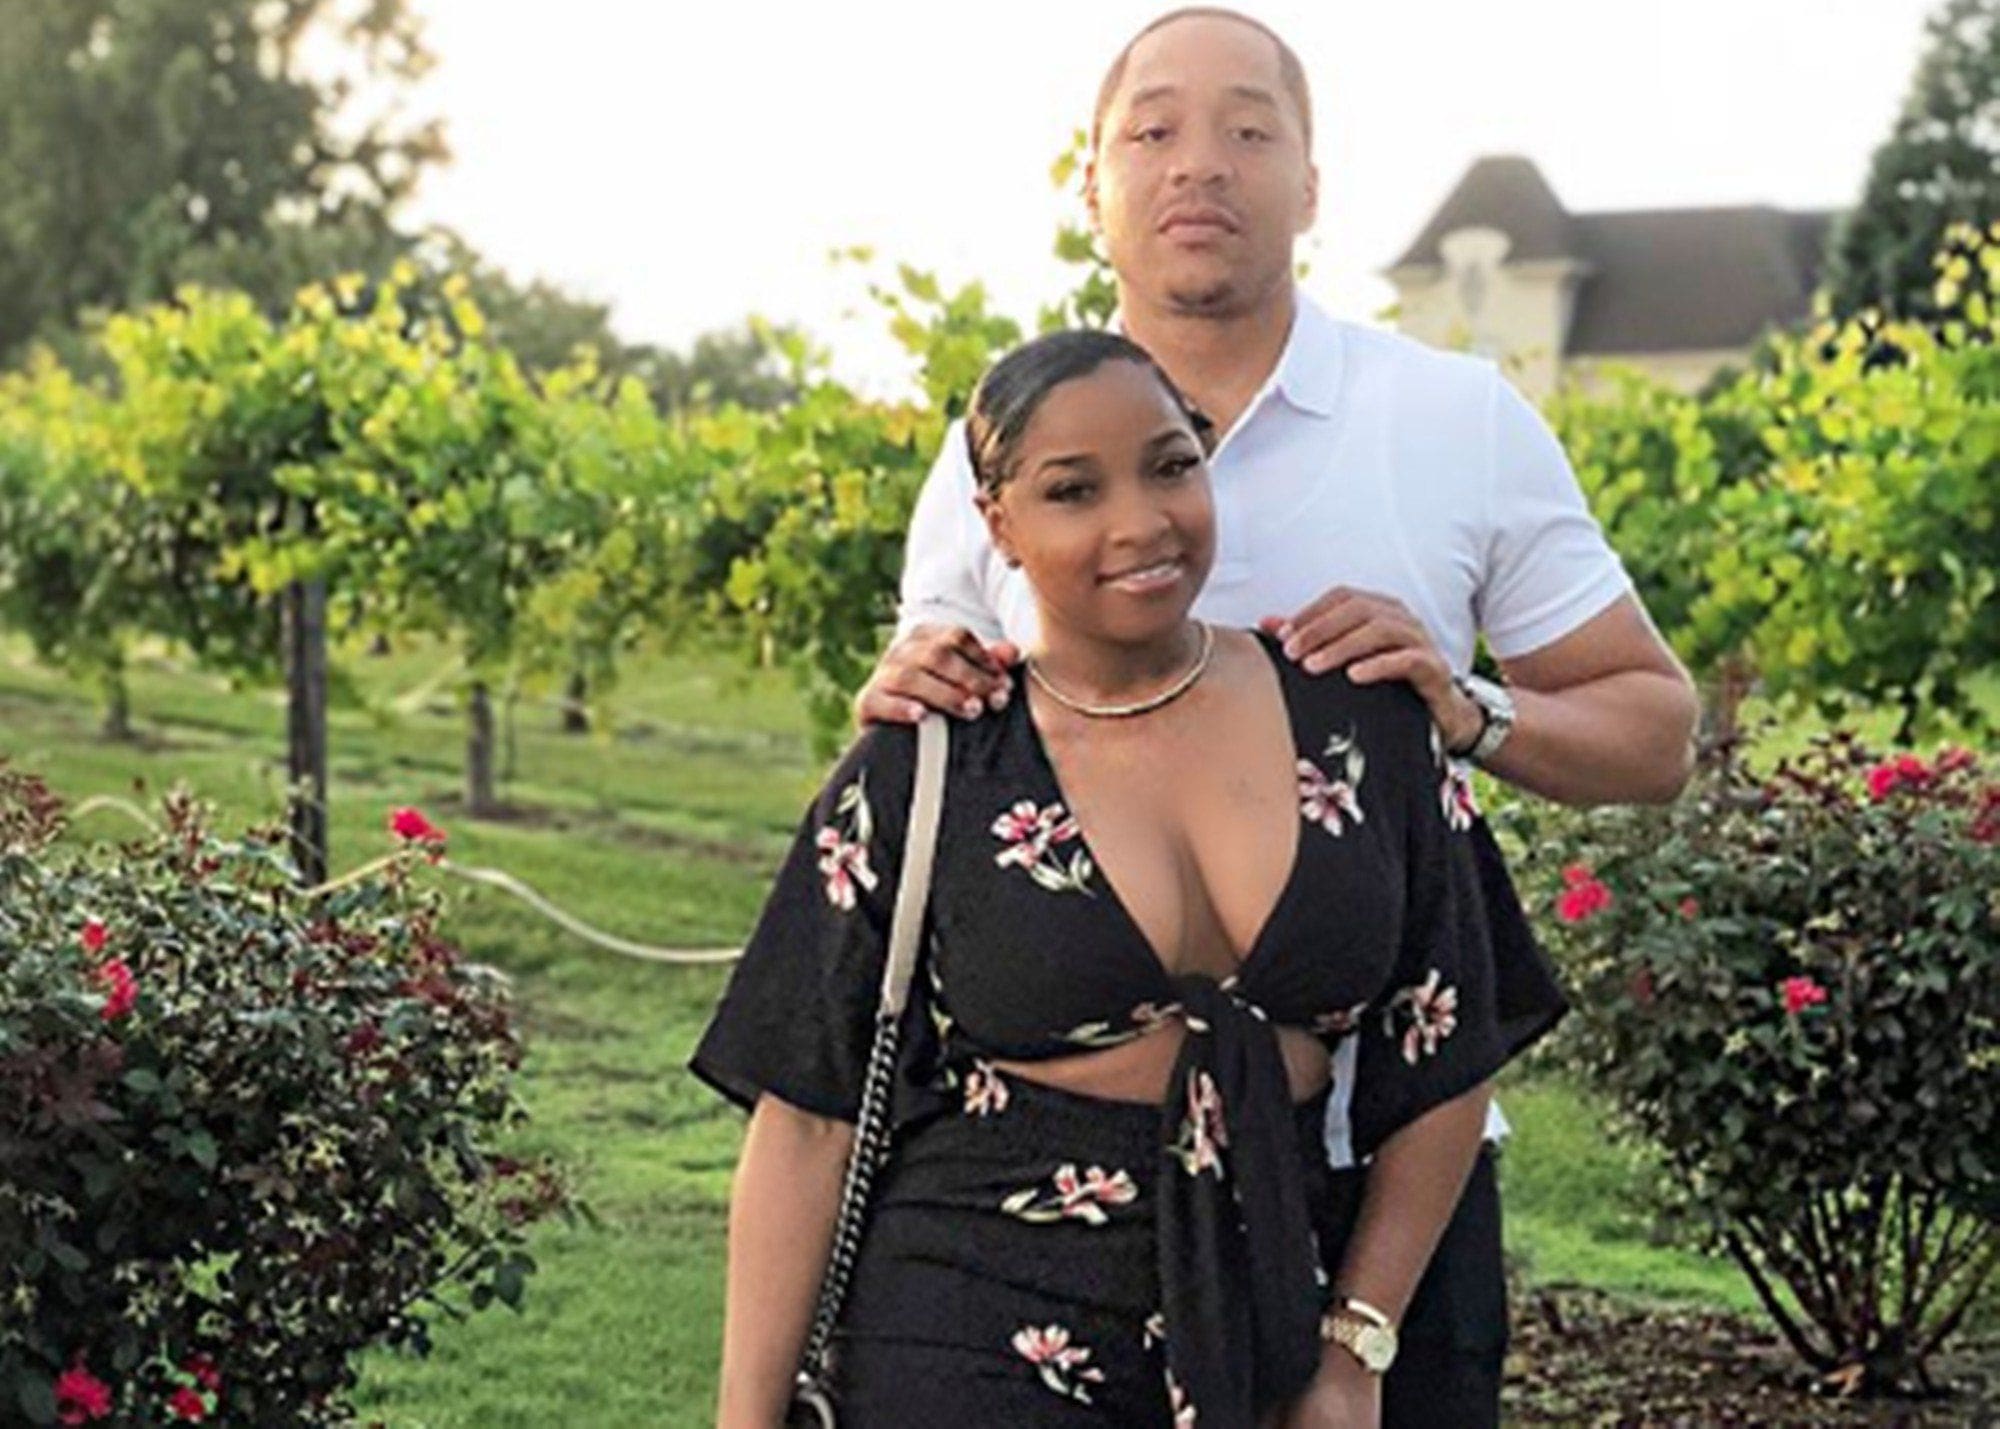 Toya Johnson Breaks The Internet With These Pics - Check Out Her Insanely Toned Body!